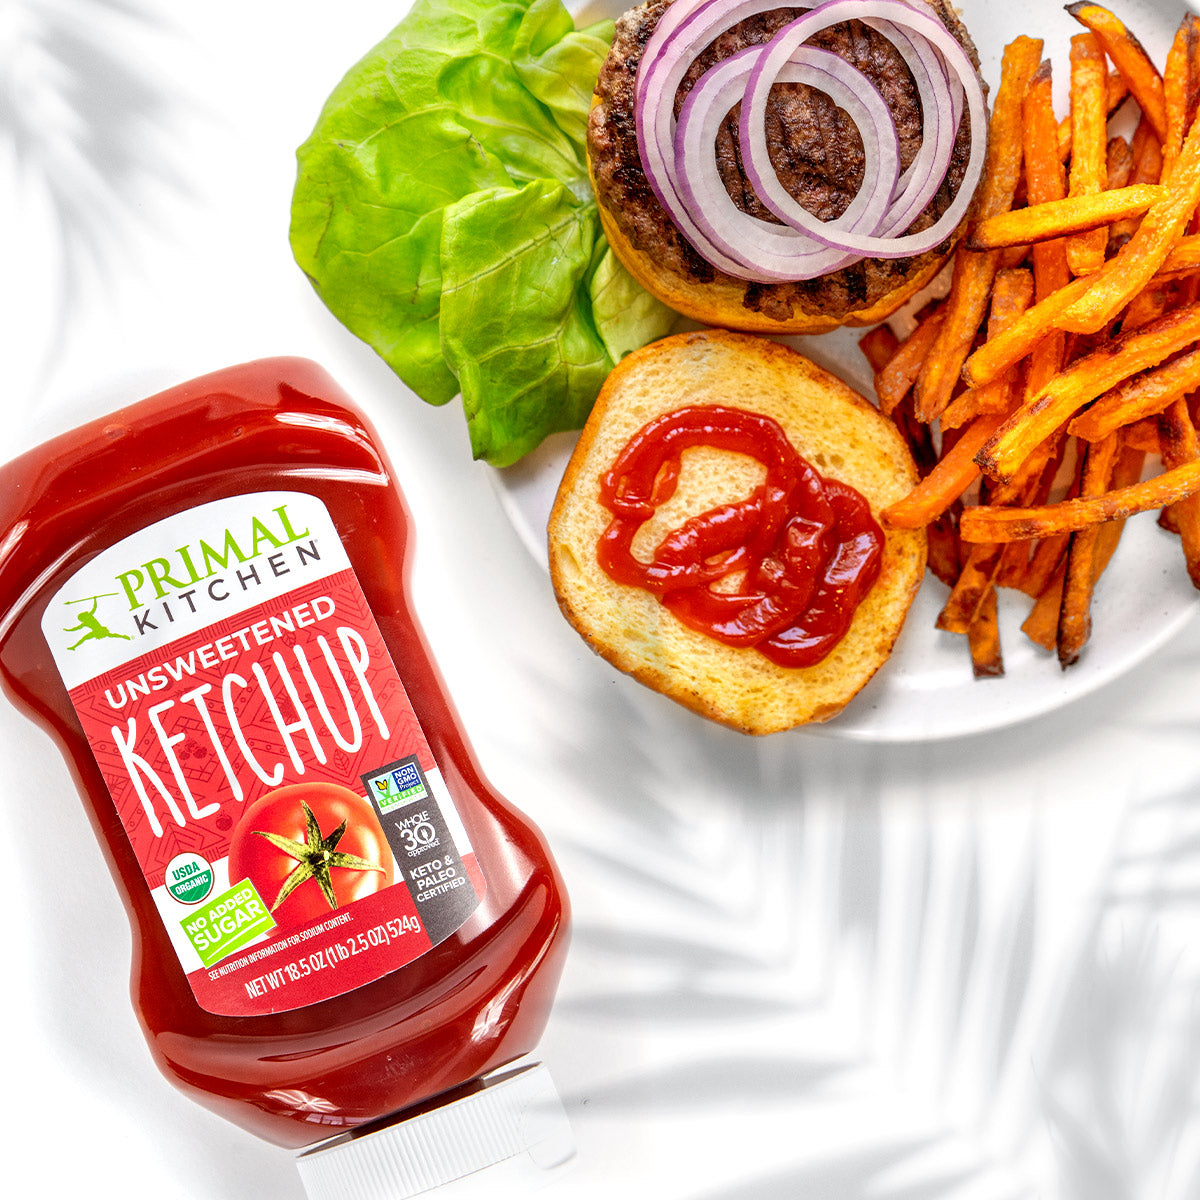 Primal Kitchen Unsweetened Ketchup in a squeeze bottle next to a plate with an open-faced paleo burger with lettuce, onions, and sweet potato fries